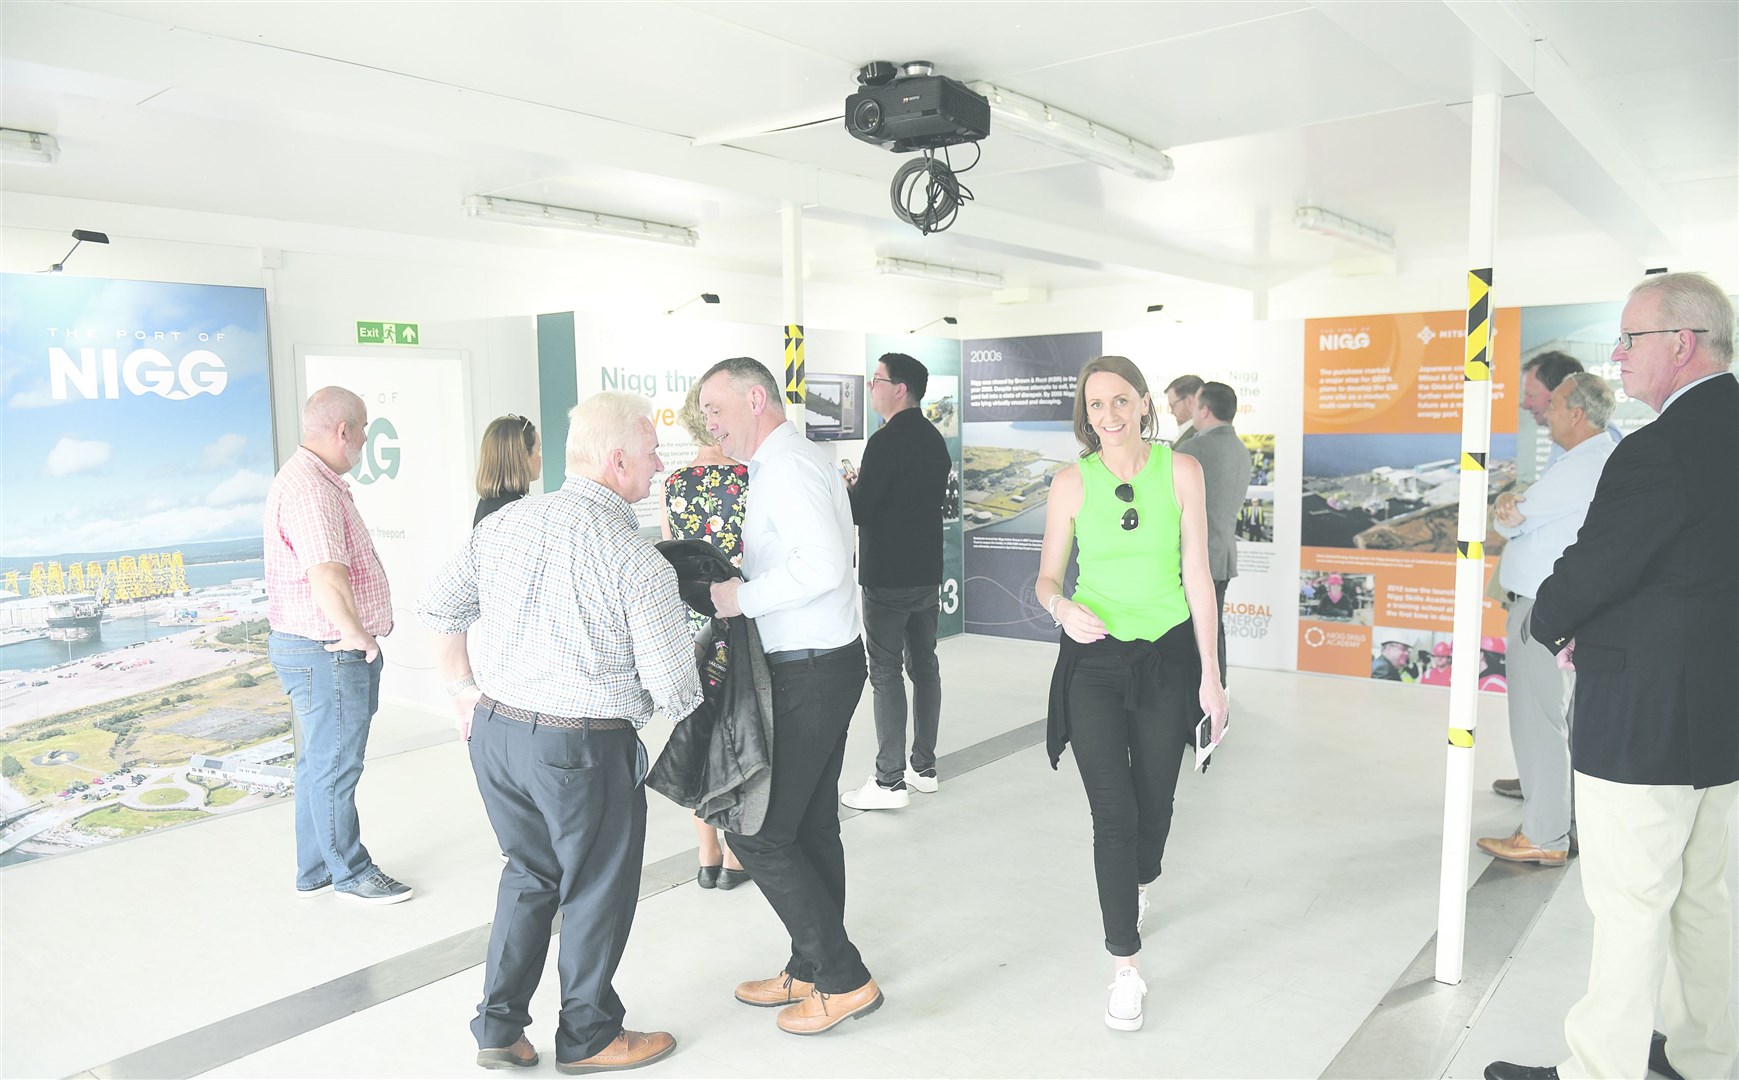 Visitors at the open day could learn more about the site.